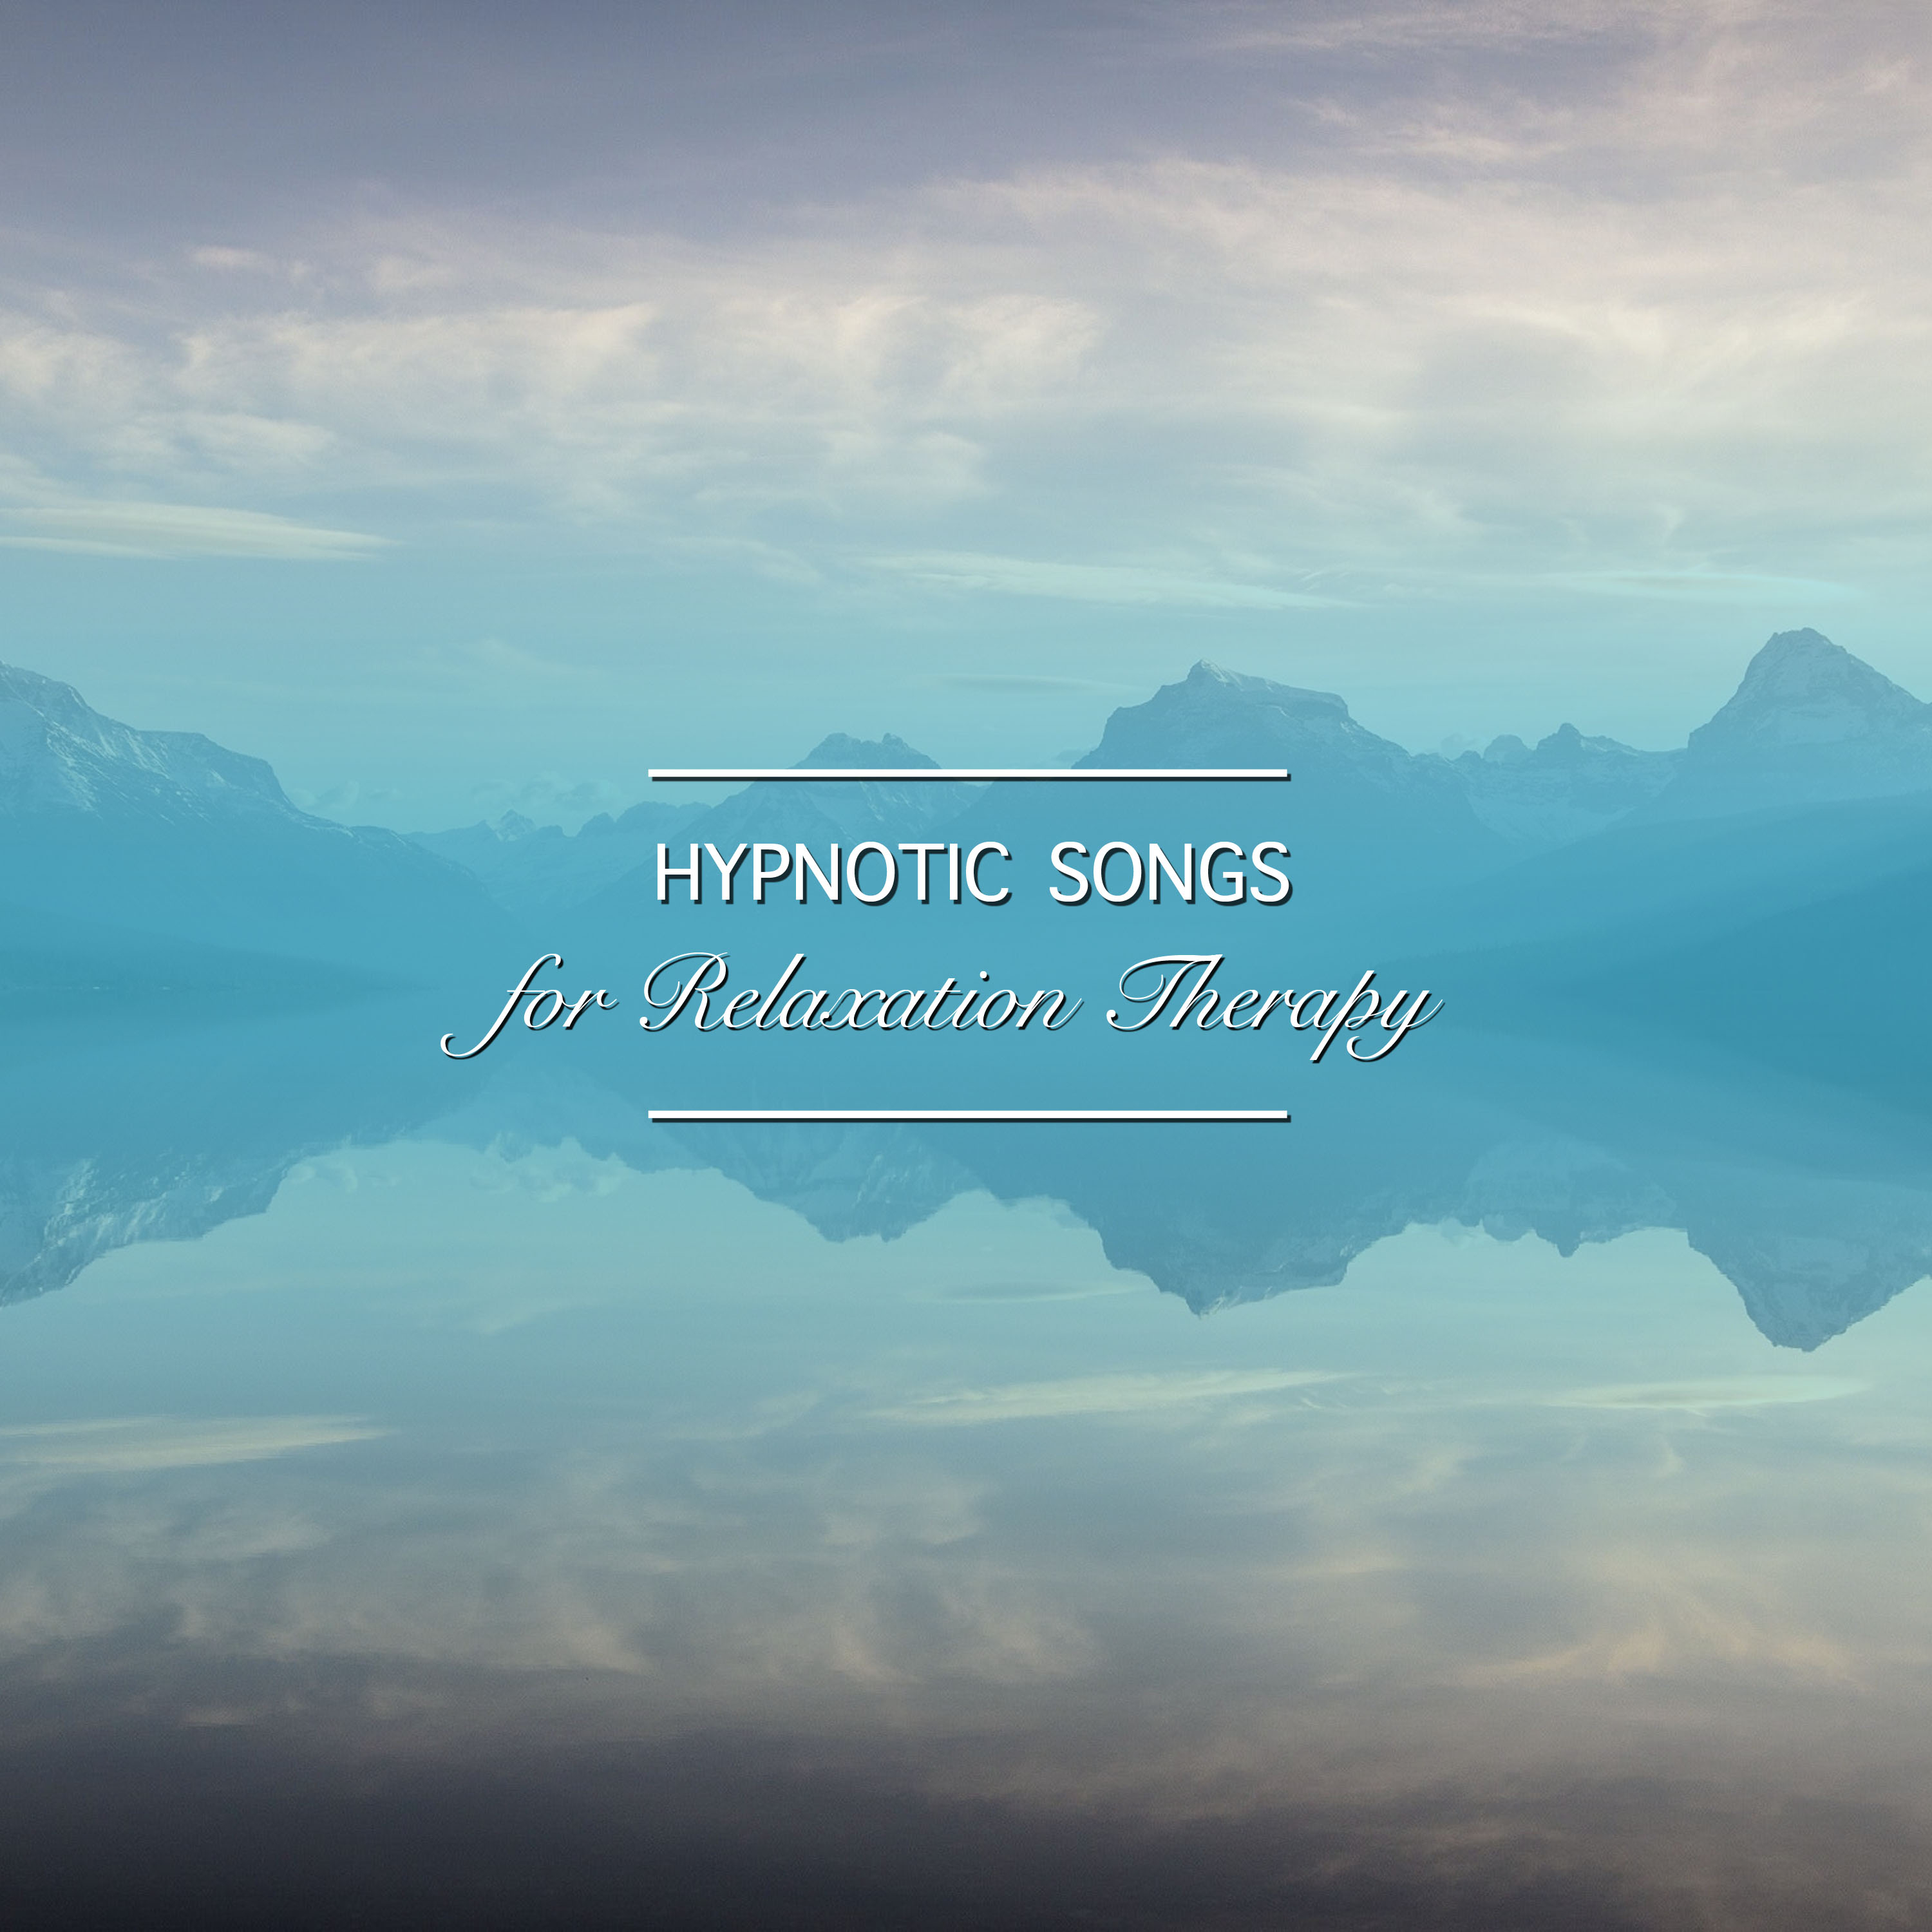 19 Hypnotic Songs for Relaxation Therapy